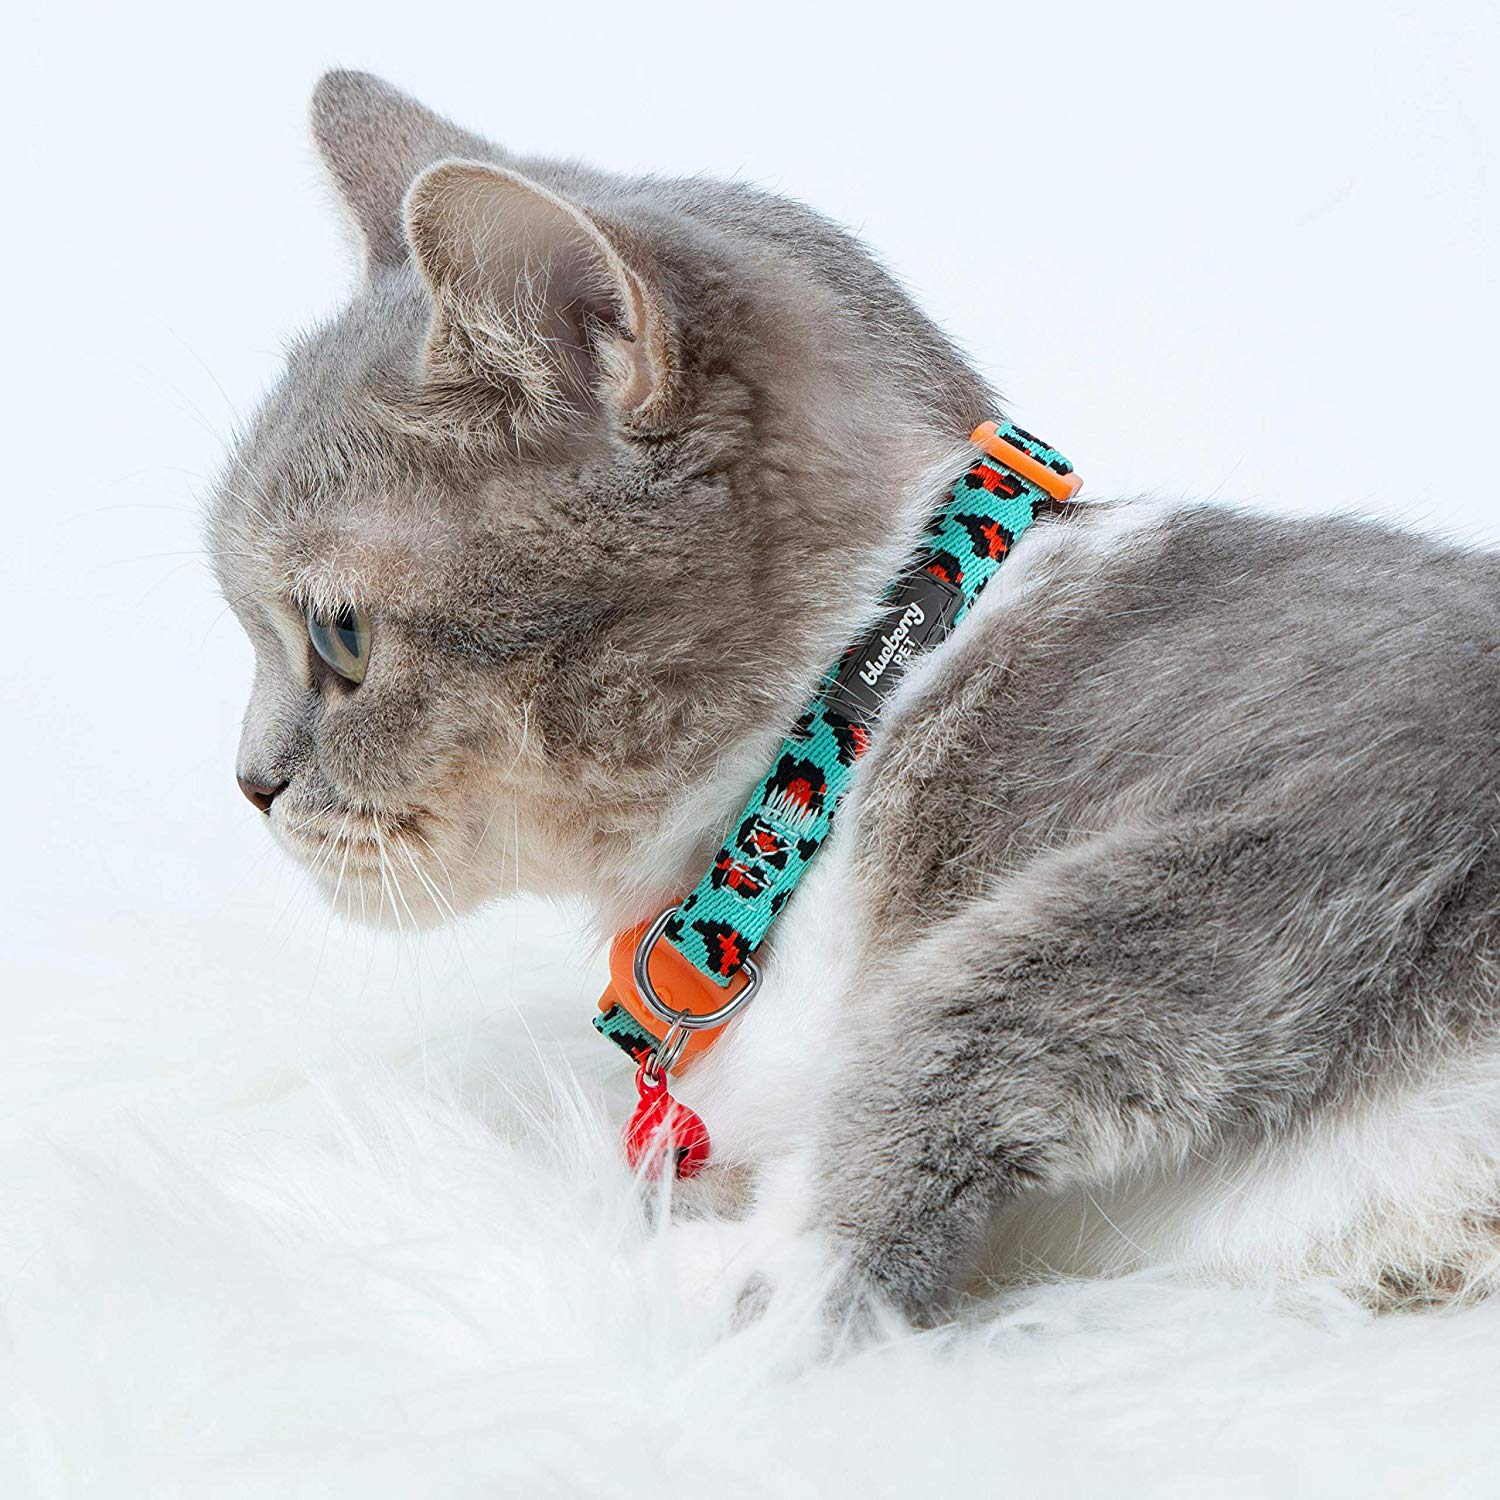 Adjusts to Fit Kittens Patricks Day Cat Collar with Safety Breakaway Clasp St 